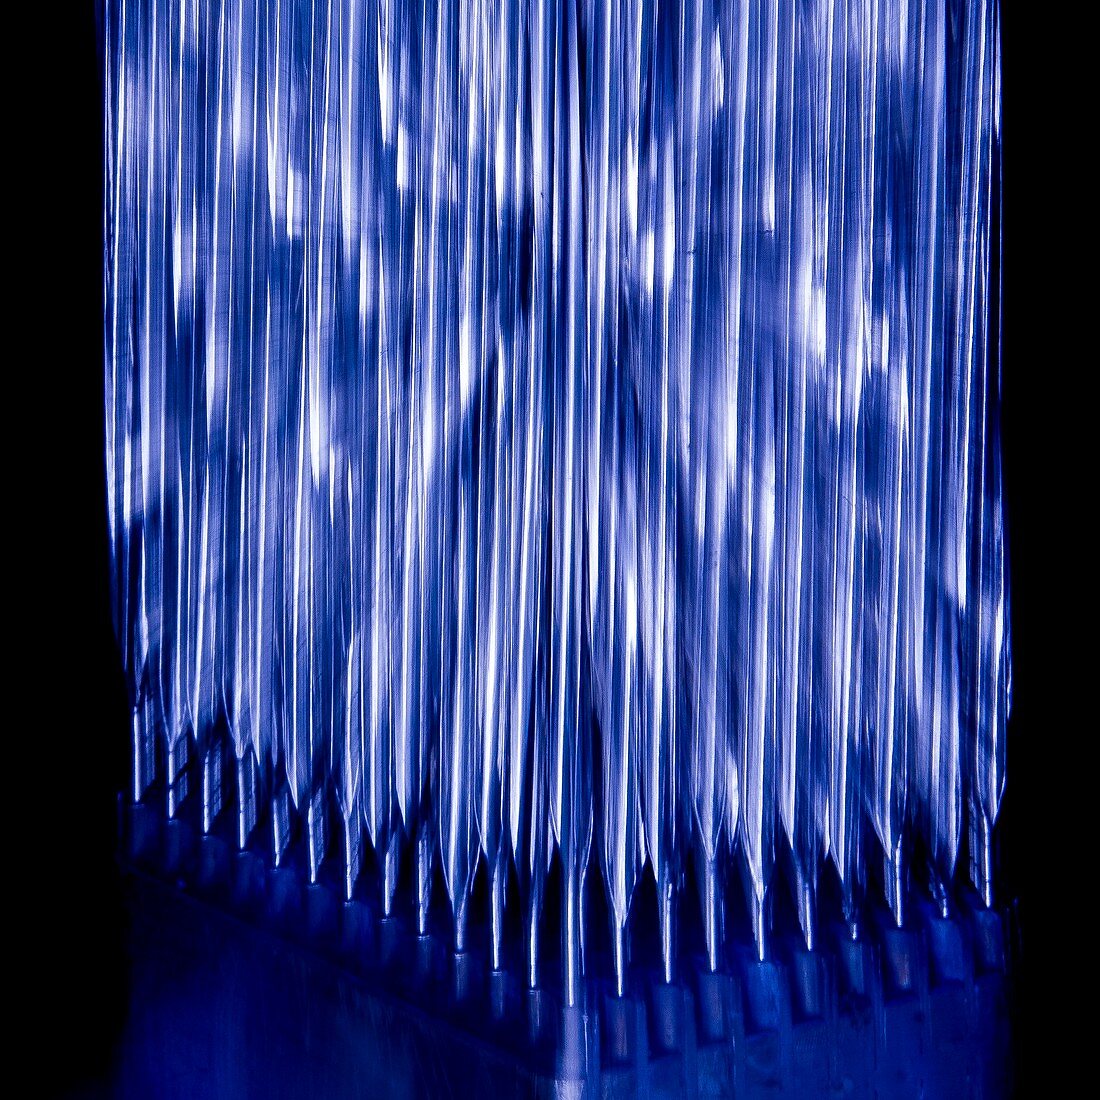 High-neutron-flux nuclear reactor fuel rods, abstract image